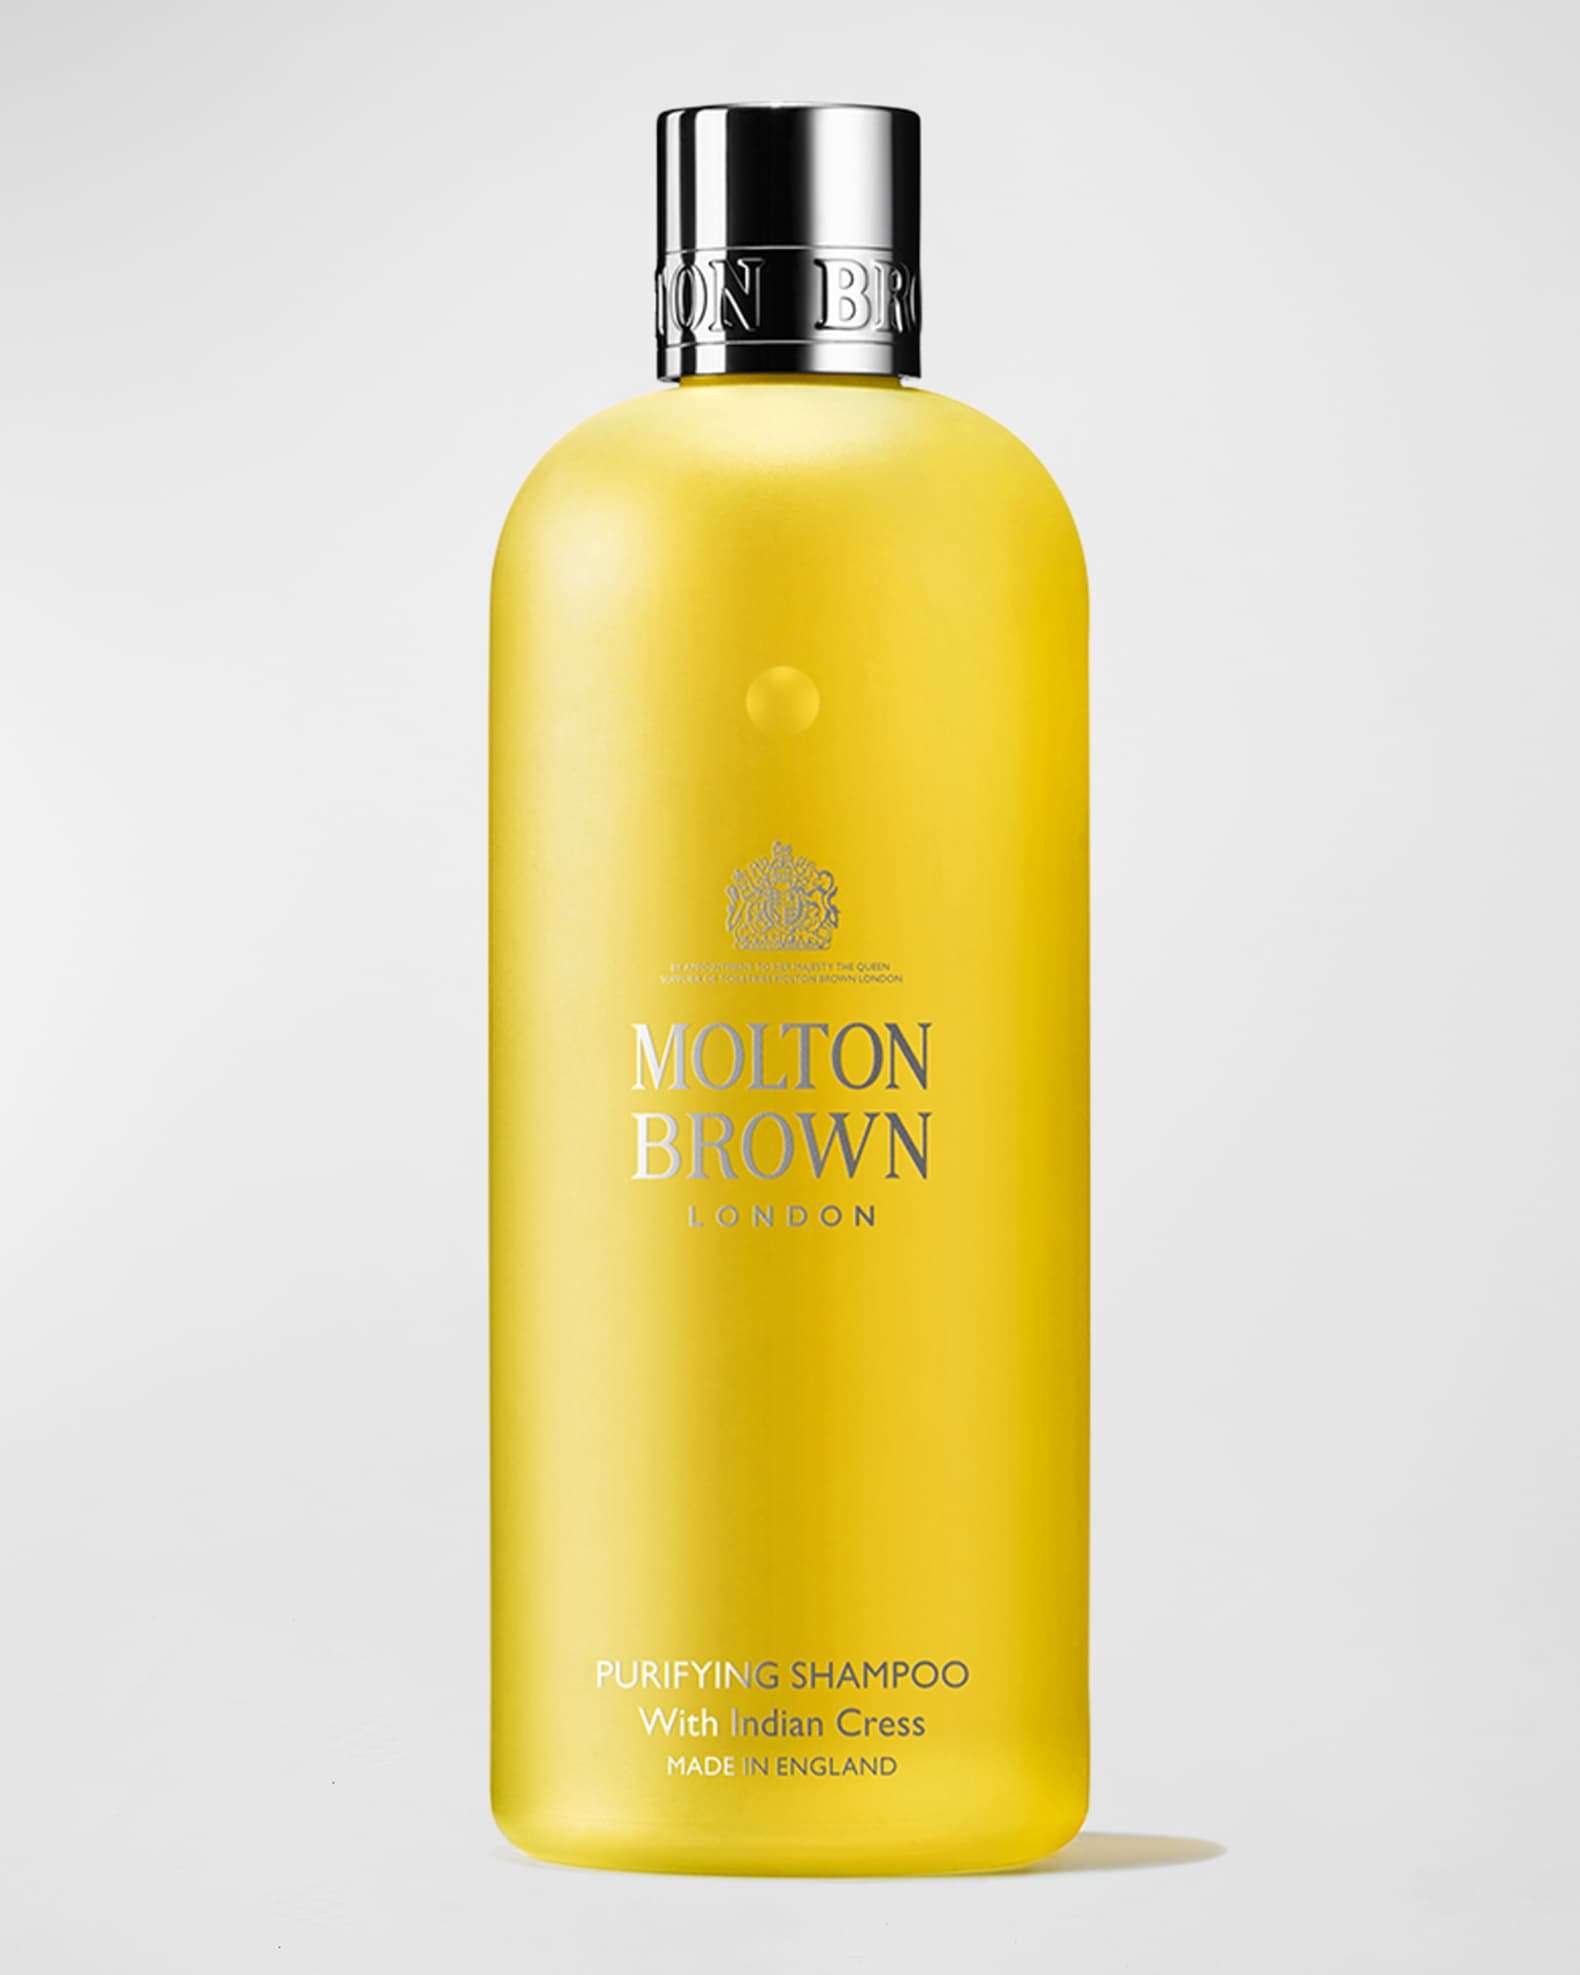 Et kors screech eskalere Molton Brown Purifying Collection with Indian Cress Shampoo, 10 oz. |  Neiman Marcus